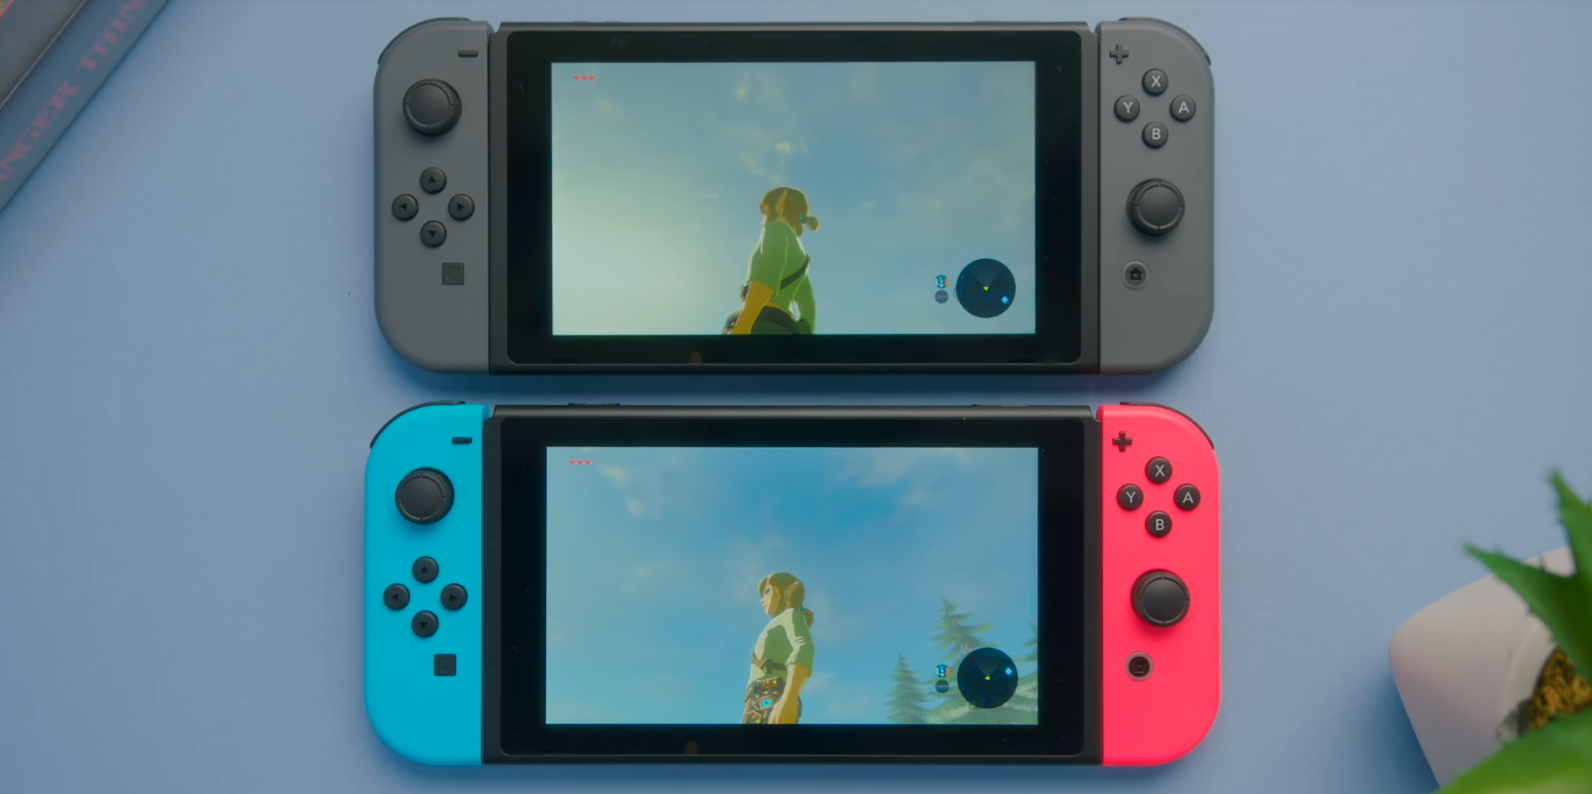 New Nintendo Switch Has A Slightly Improved Display Test Suggests Vgc